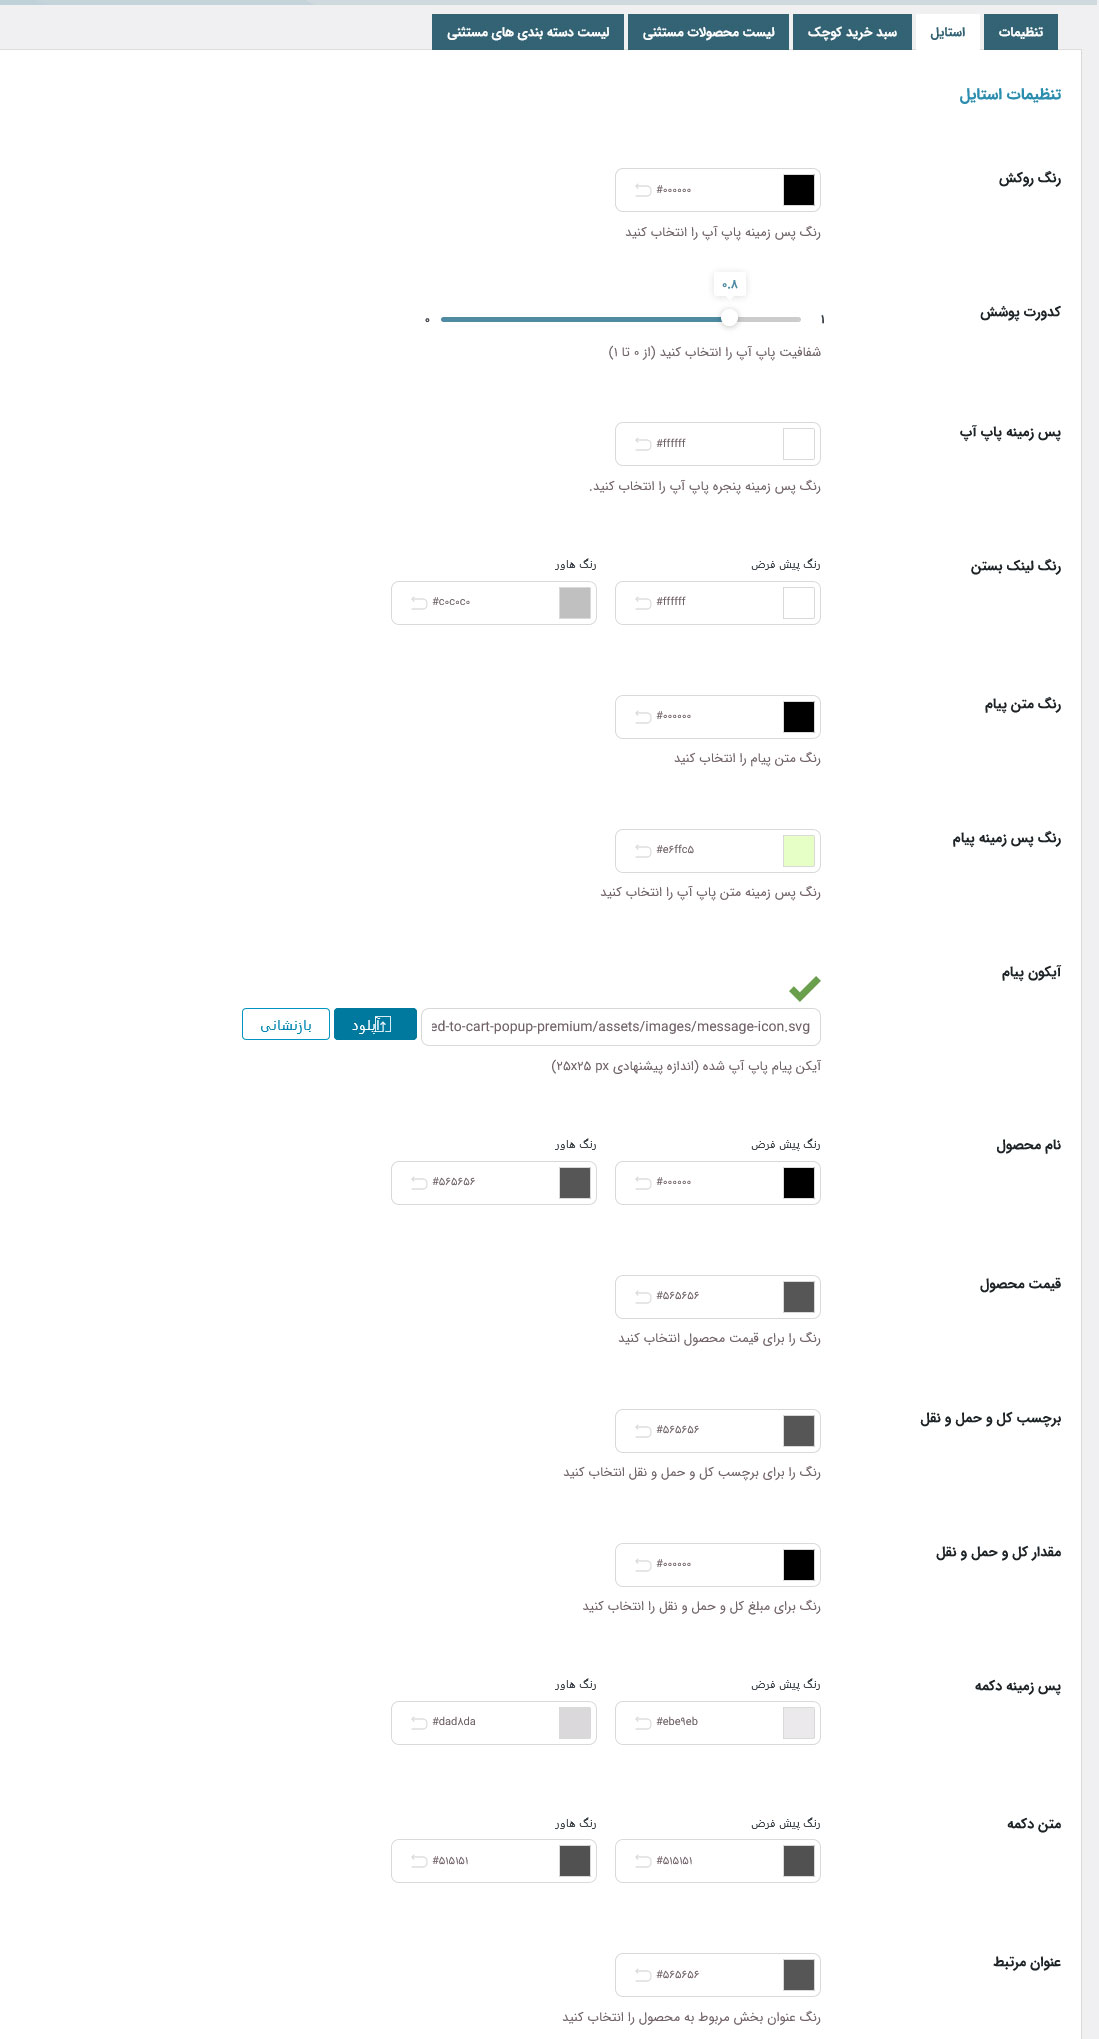 5e40b907ae44a321e796d80514f6d50fba38c48b1054e1 - دانلود افزونه yith Added to Cart Popup، سبد خرید پاپ آپ